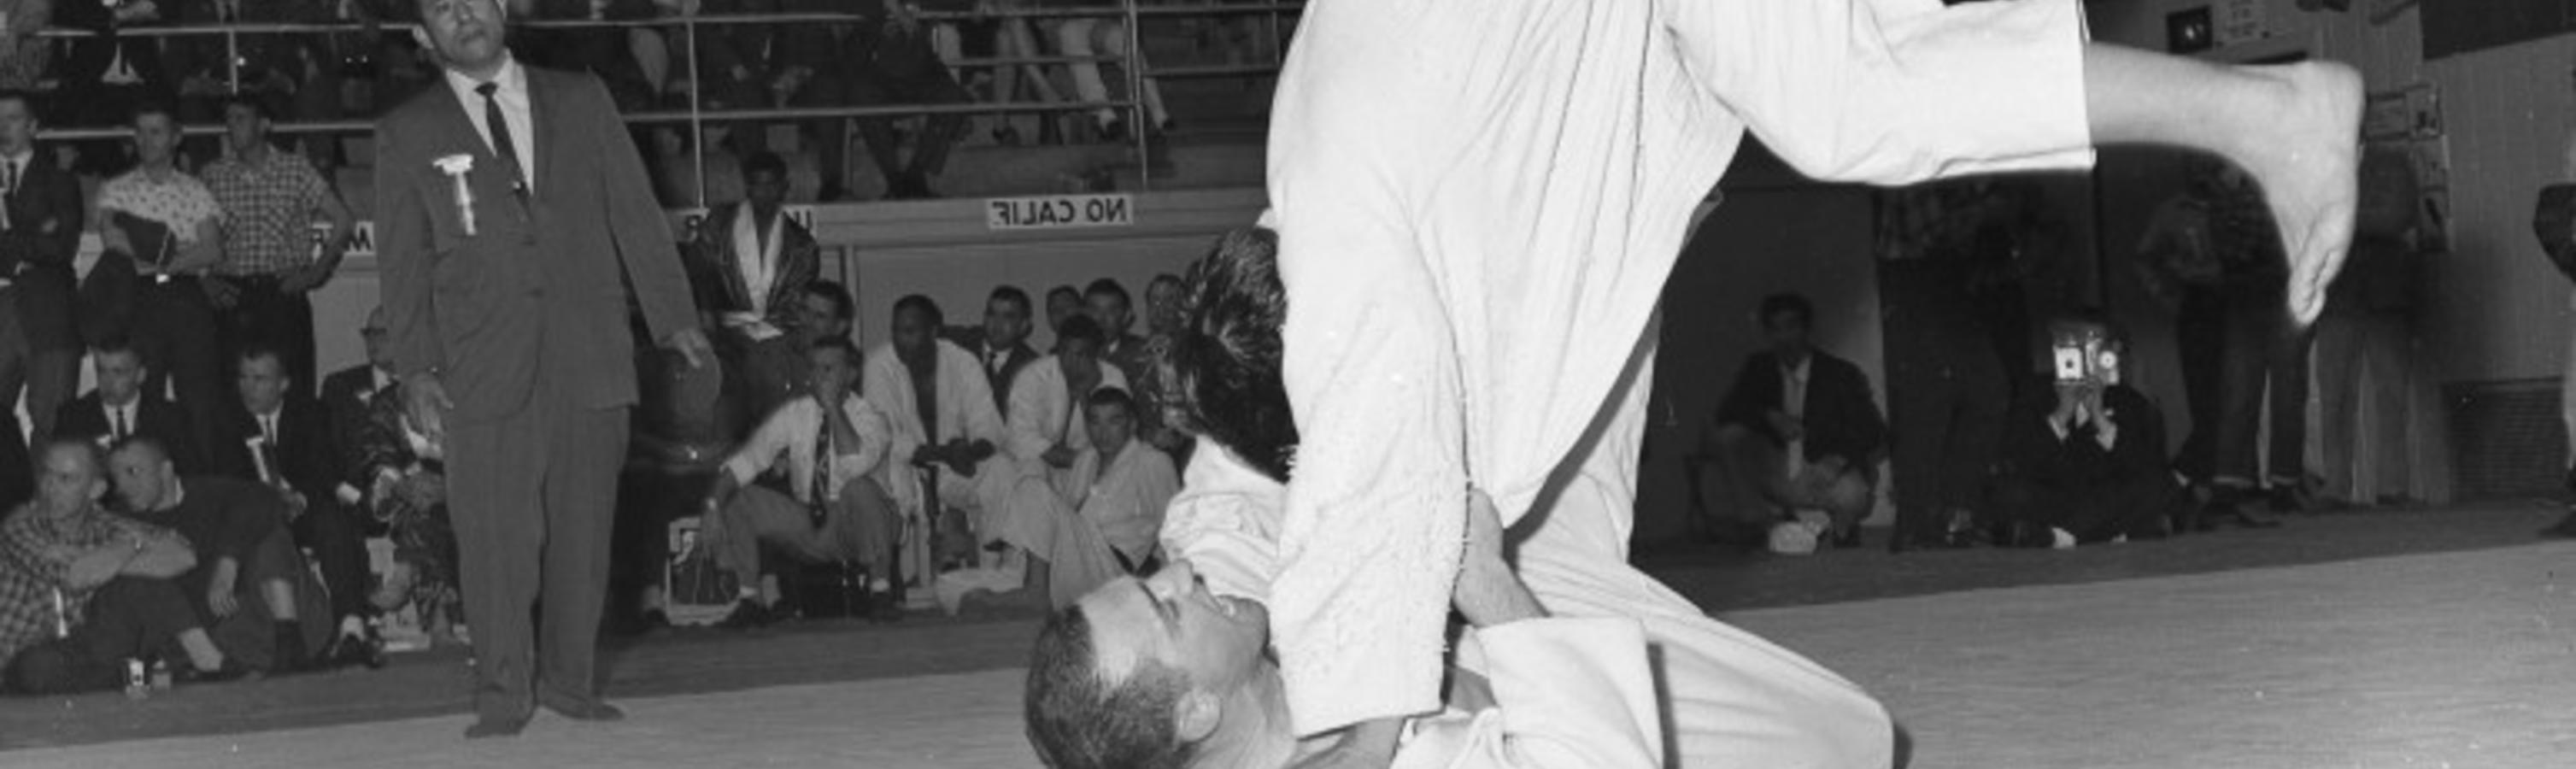 Two men compete in a judo match.